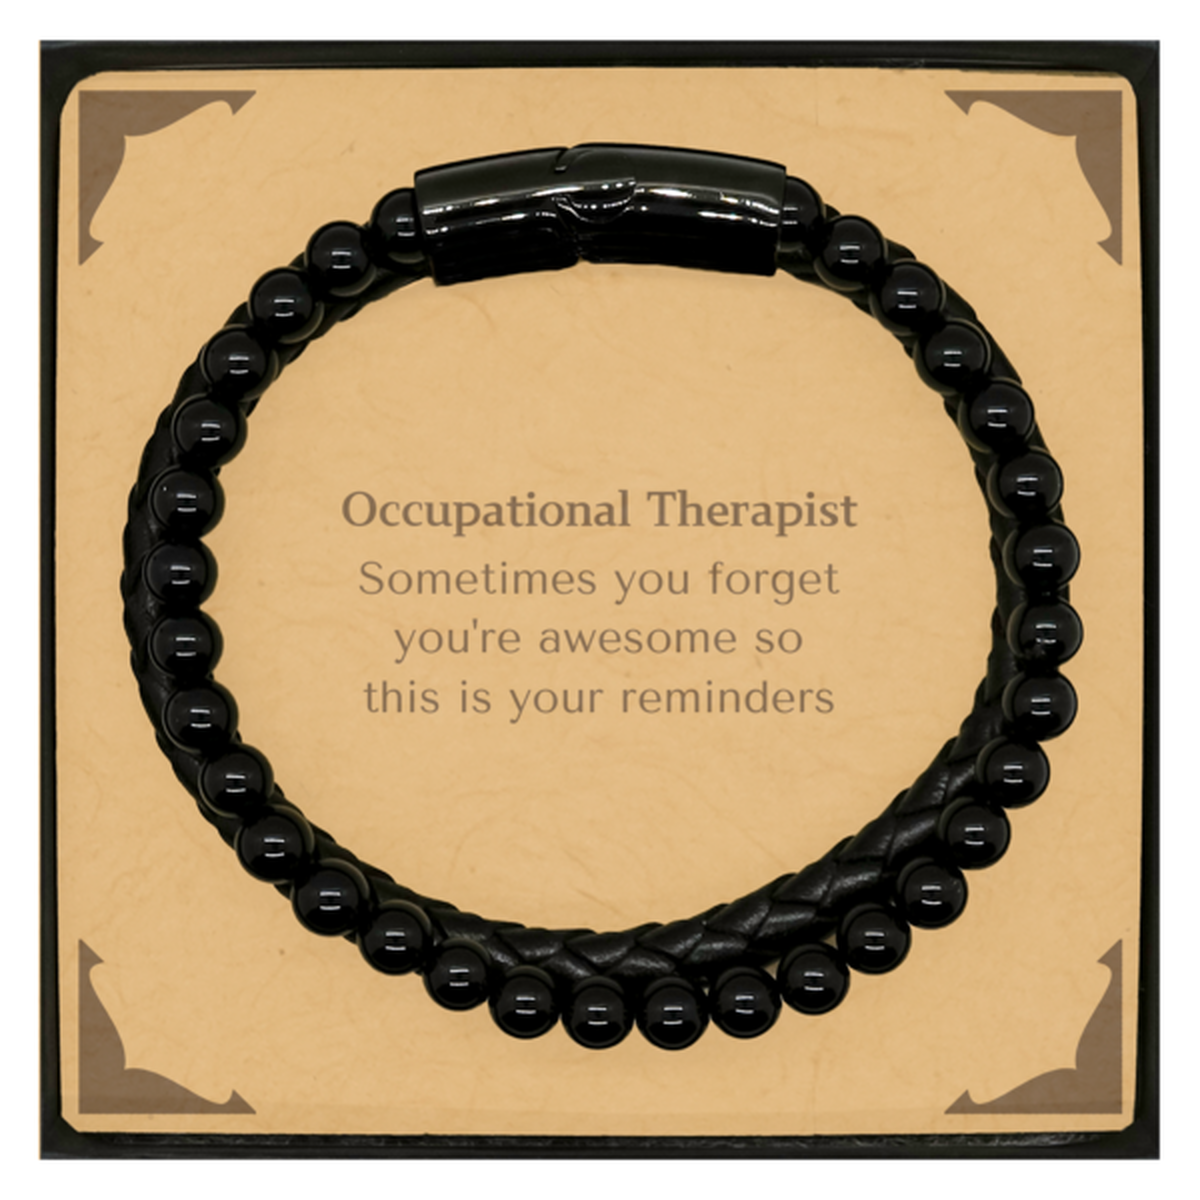 Sentimental Occupational Therapist Stone Leather Bracelets, Occupational Therapist Sometimes you forget you're awesome so this is your reminders, Graduation Christmas Birthday Gifts for Occupational Therapist, Men, Women, Coworkers